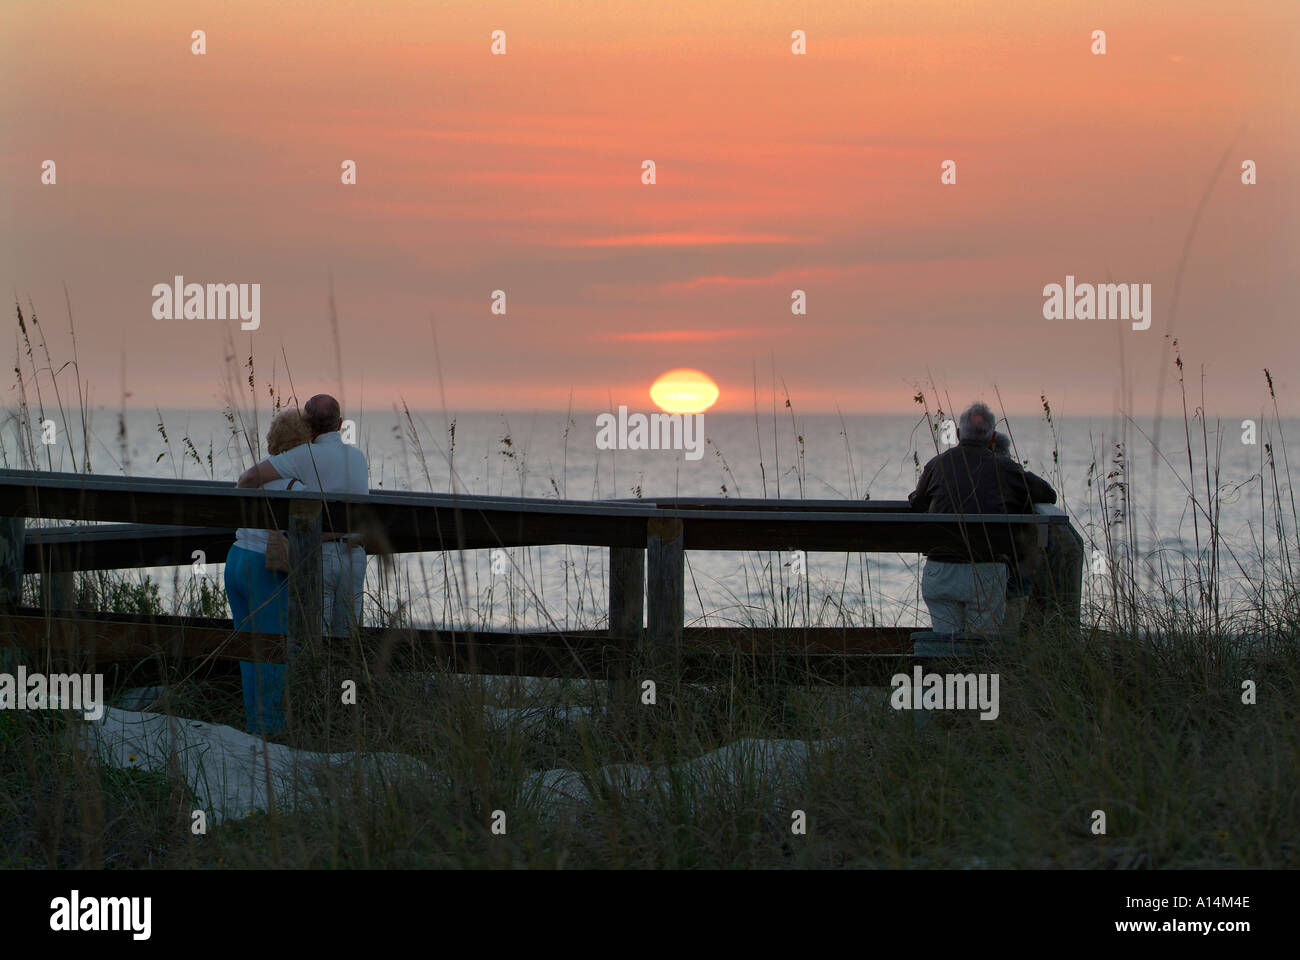 Sunset over the Gulf of Mexico at St Pete Beach Florida Stock Photo